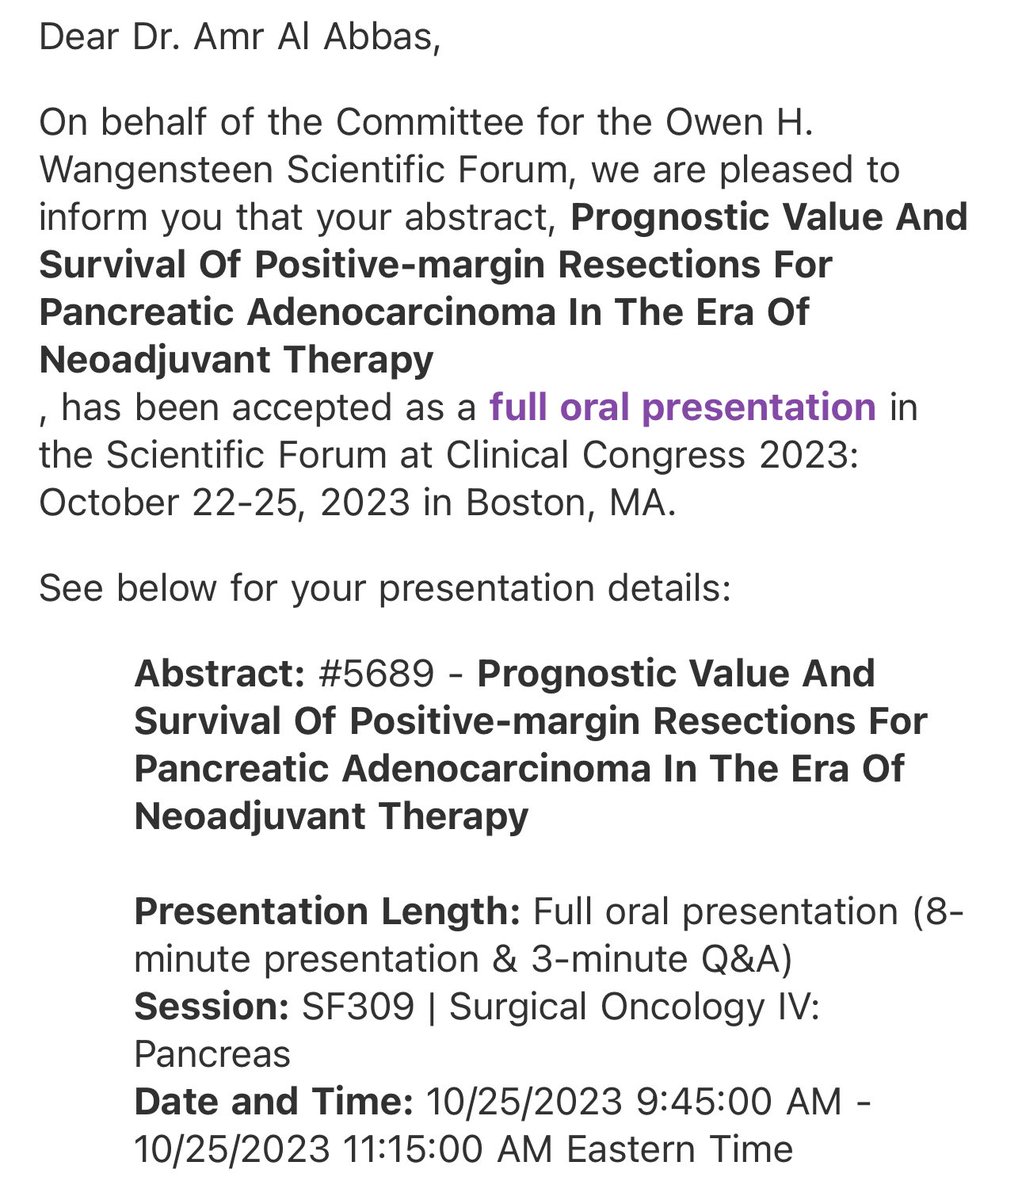 Excited for the opportunity to give two full oral presentations on our work on Pancreas Cancer and @surgicalsafety ORBB at ACS come October 2023! 

Thanks to @herbert_zeh @PatricioPolanc0 @RPDumasMD and @UTSW_Surgery @UTSWSurgeryLife for their support and mentorship!